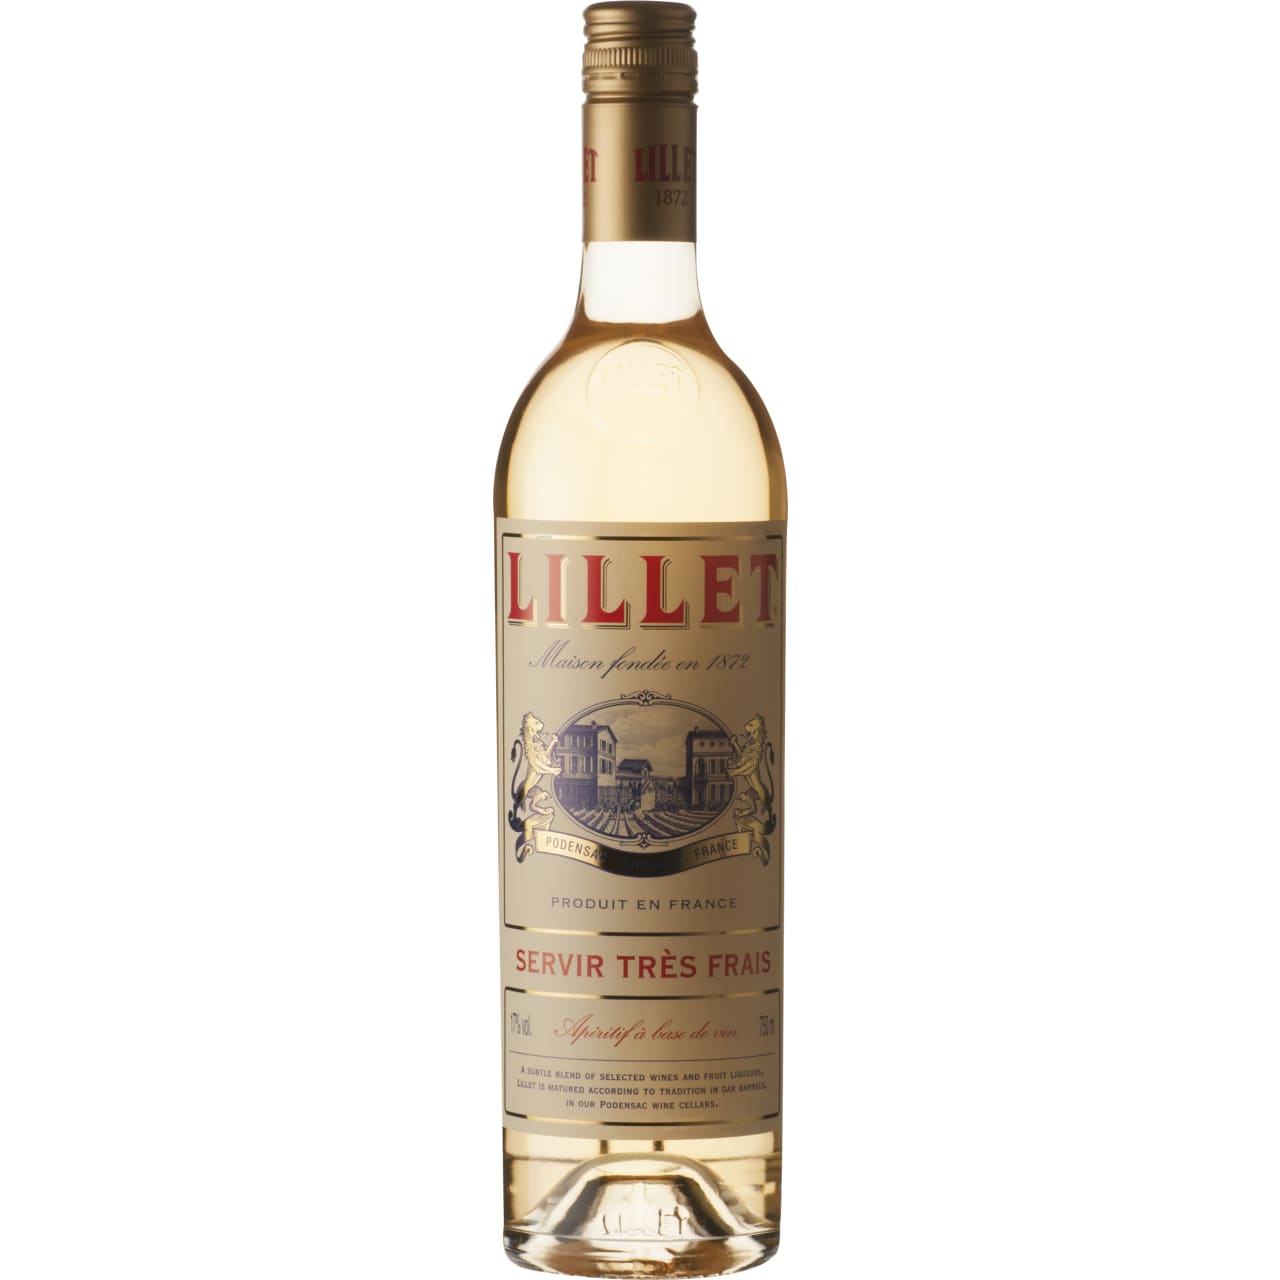 A wonderful blend of fruits and white wines matured in Oak casks for 6-12 months. A rich, full fruited flavoured drink, enjoy in a classic Martini.